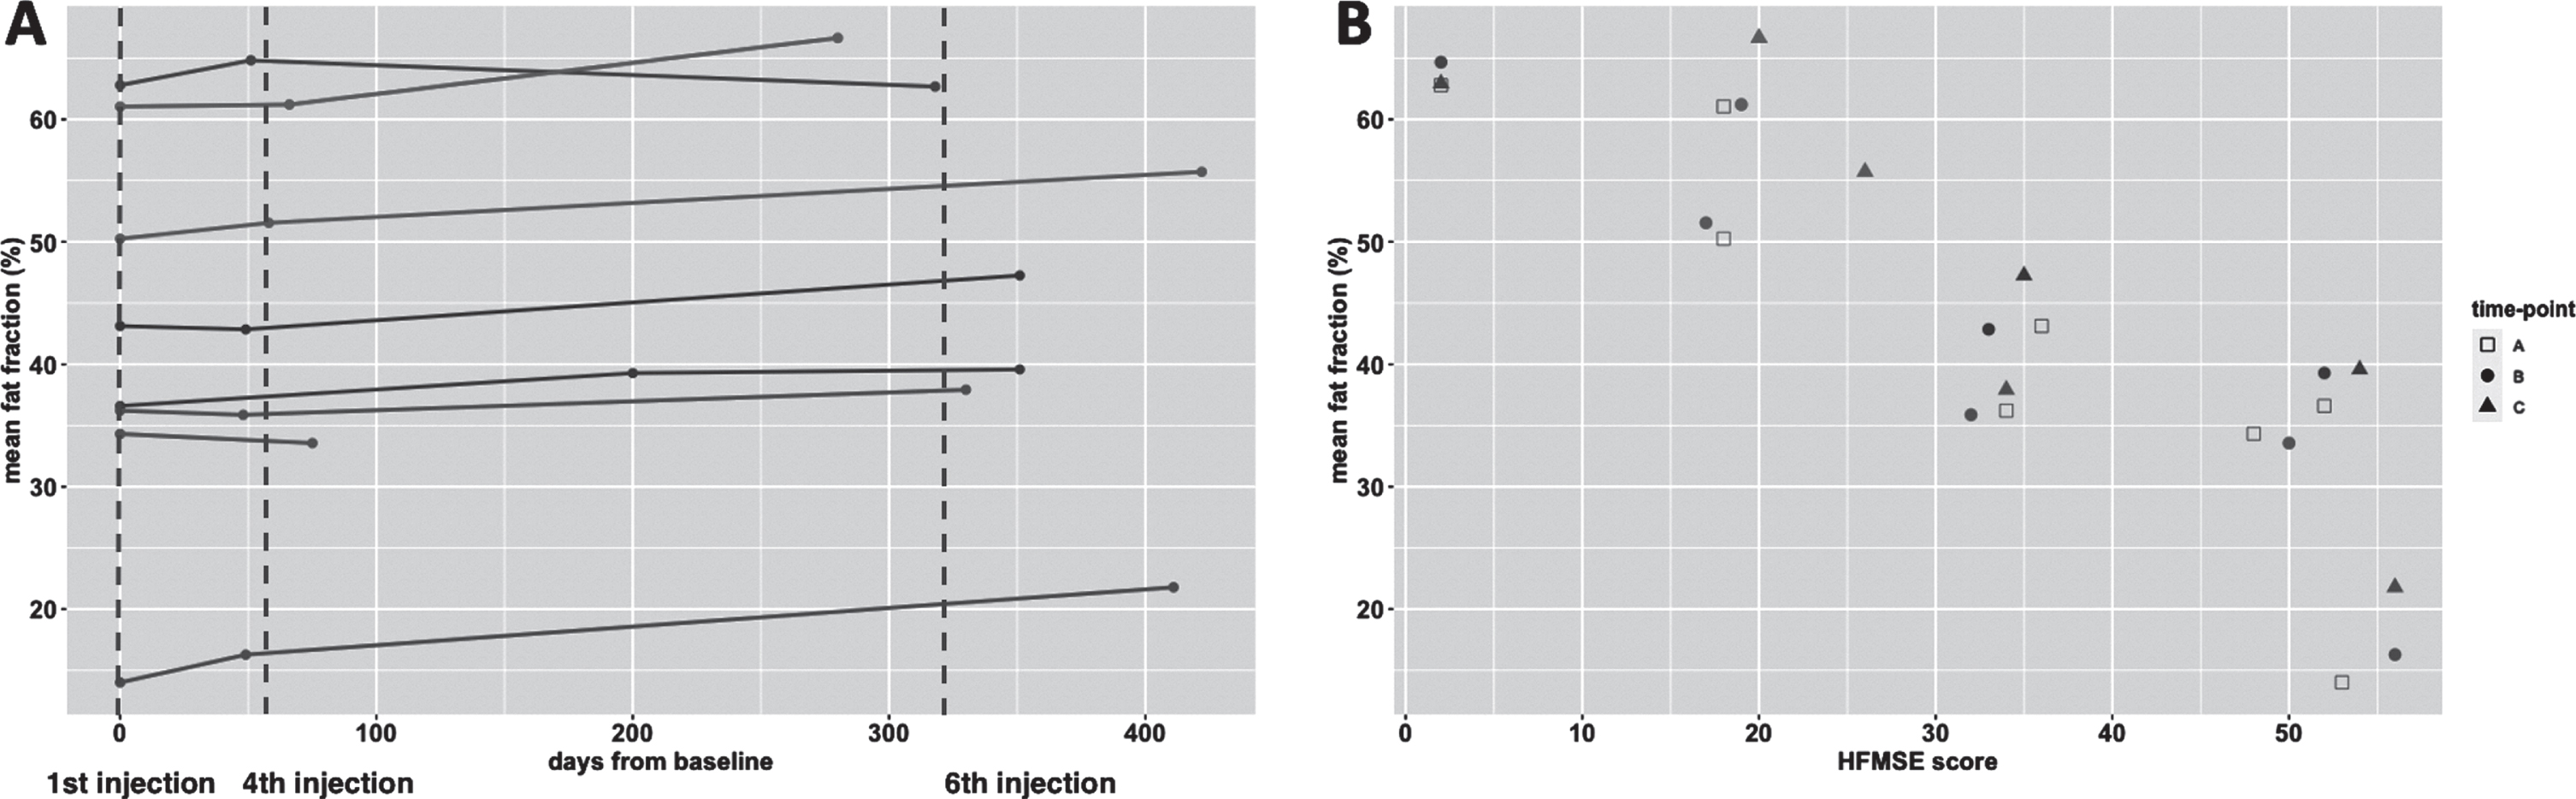 Fat fraction over time and relation with motor function score. Legend: HFMSE = Hammersmith Functional Motor Scale, Expanded. Panel A presents the trajectory of fat fraction of subjects over time, the timing of each MR scan is presented as a bullet. The vertical dotted line indicates the schedule of the 1st, 4th and 6th nusinersen injection. In panel B the timing of scans is presented as A (baseline); B (after loading phase) and C (one year on treatment) and fat fraction at each time-point is presented in relation to the score on the HFMSE scale. Subjects go by the same color in the panels.